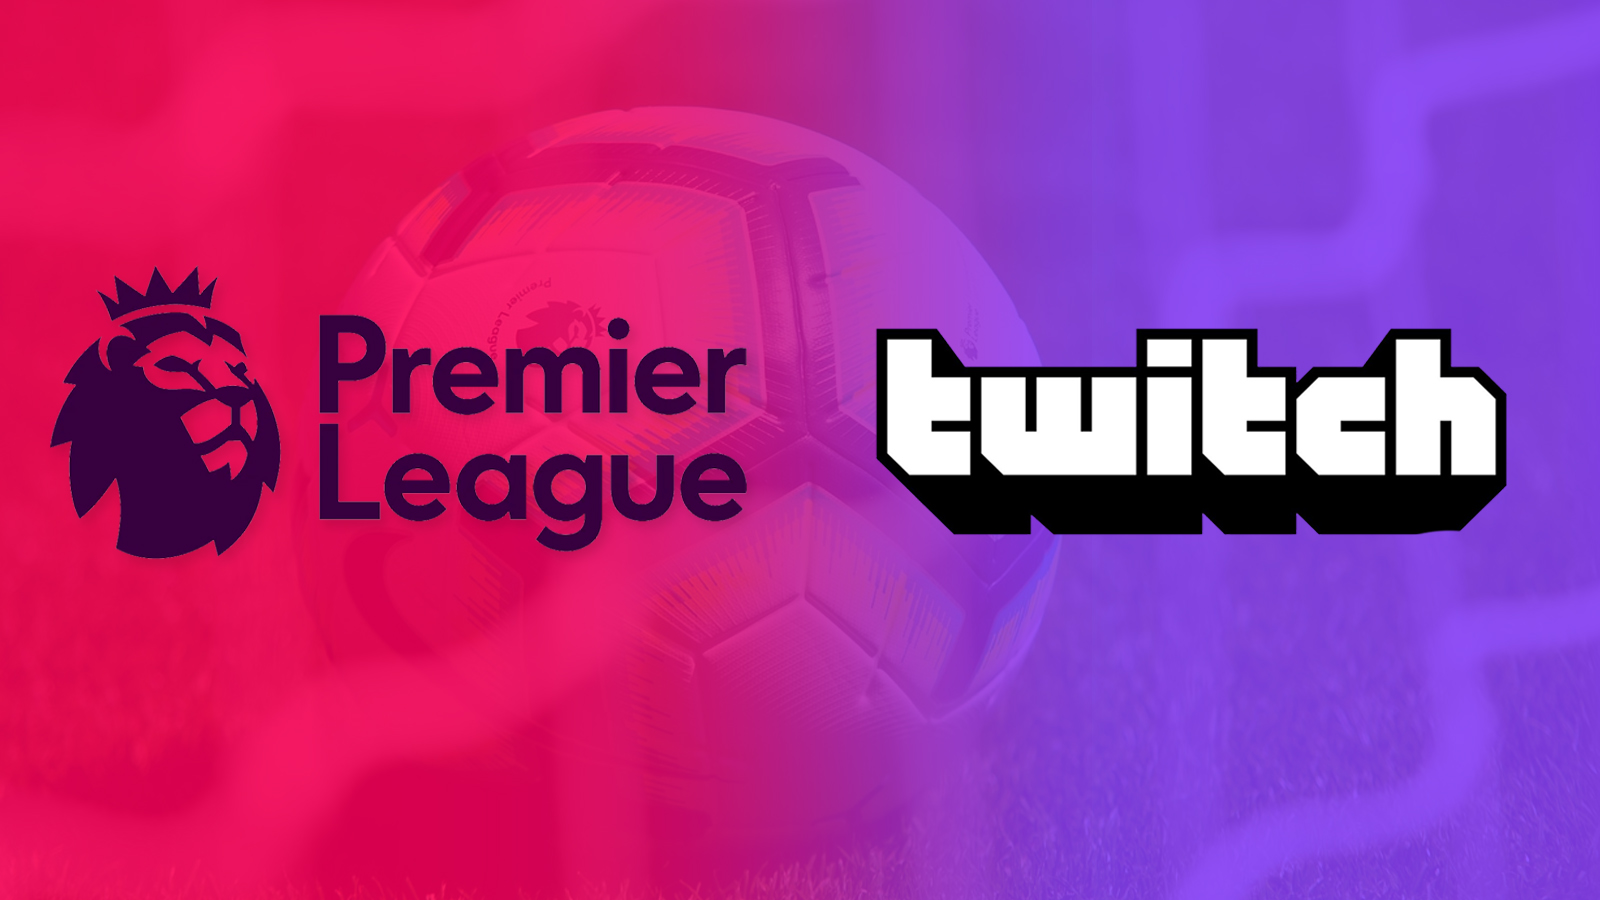 How to watch Premier League matches live on Twitch for free